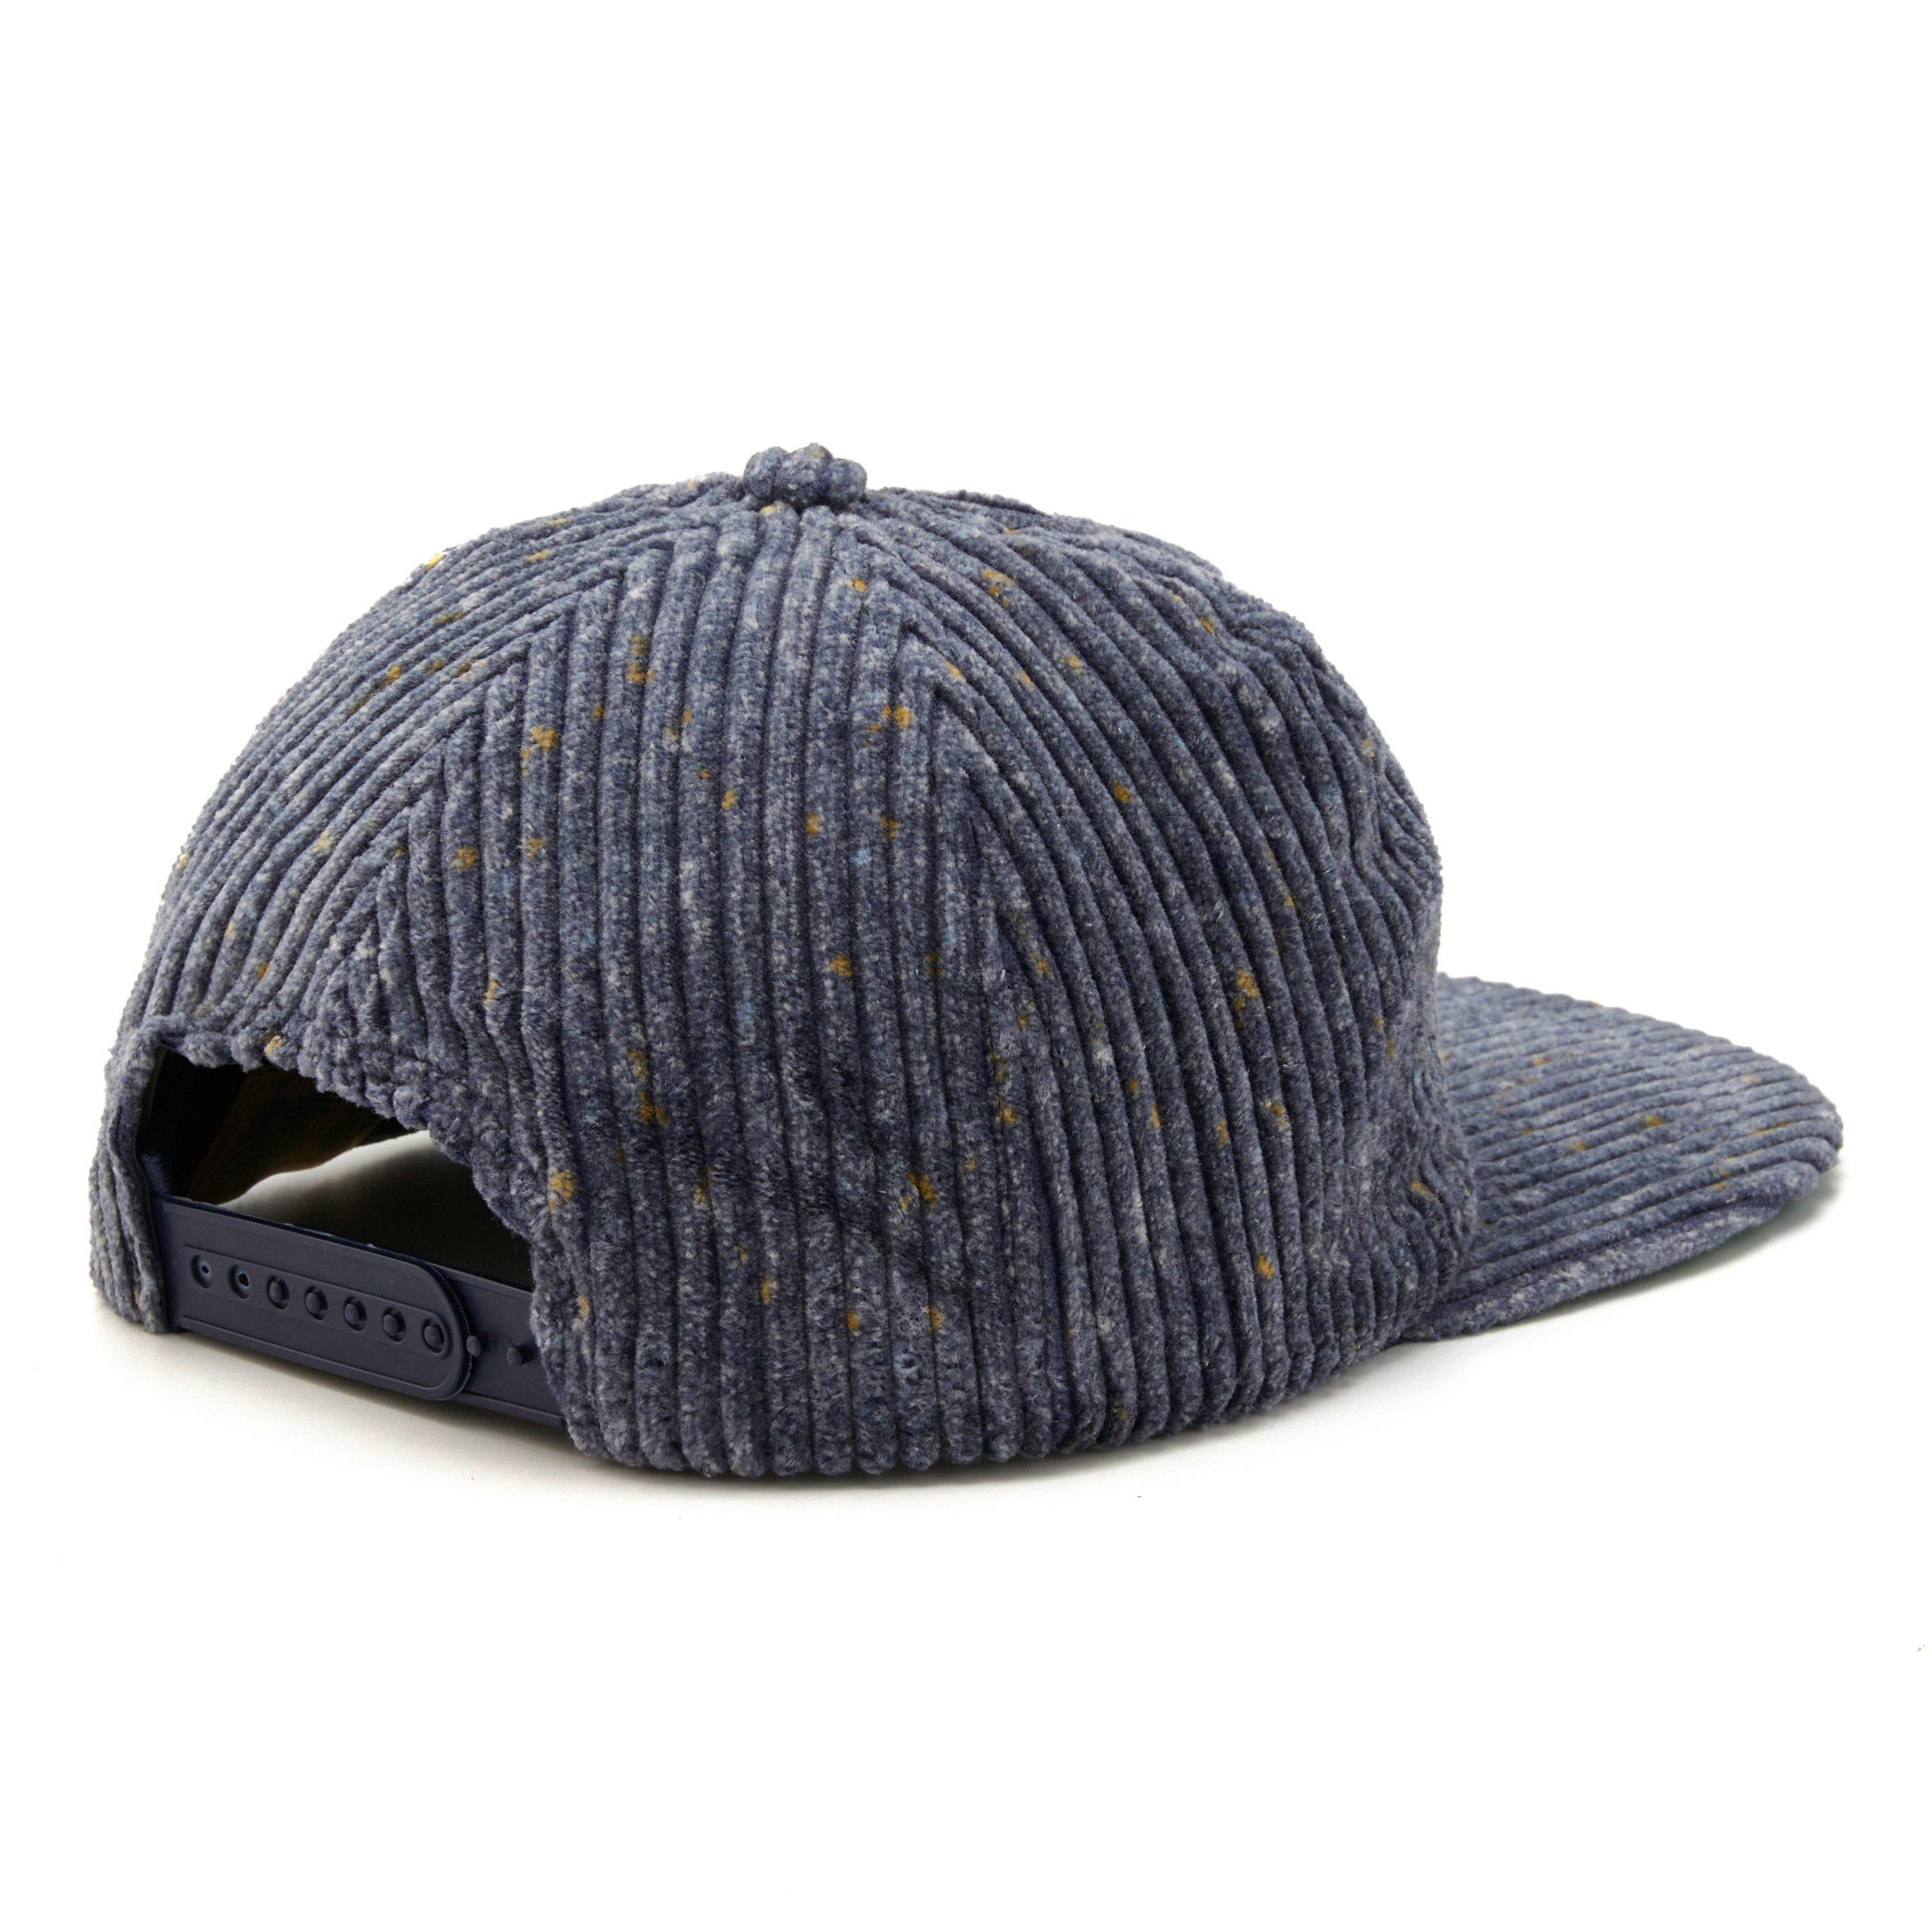 The Rancher Insulated Wool Cap